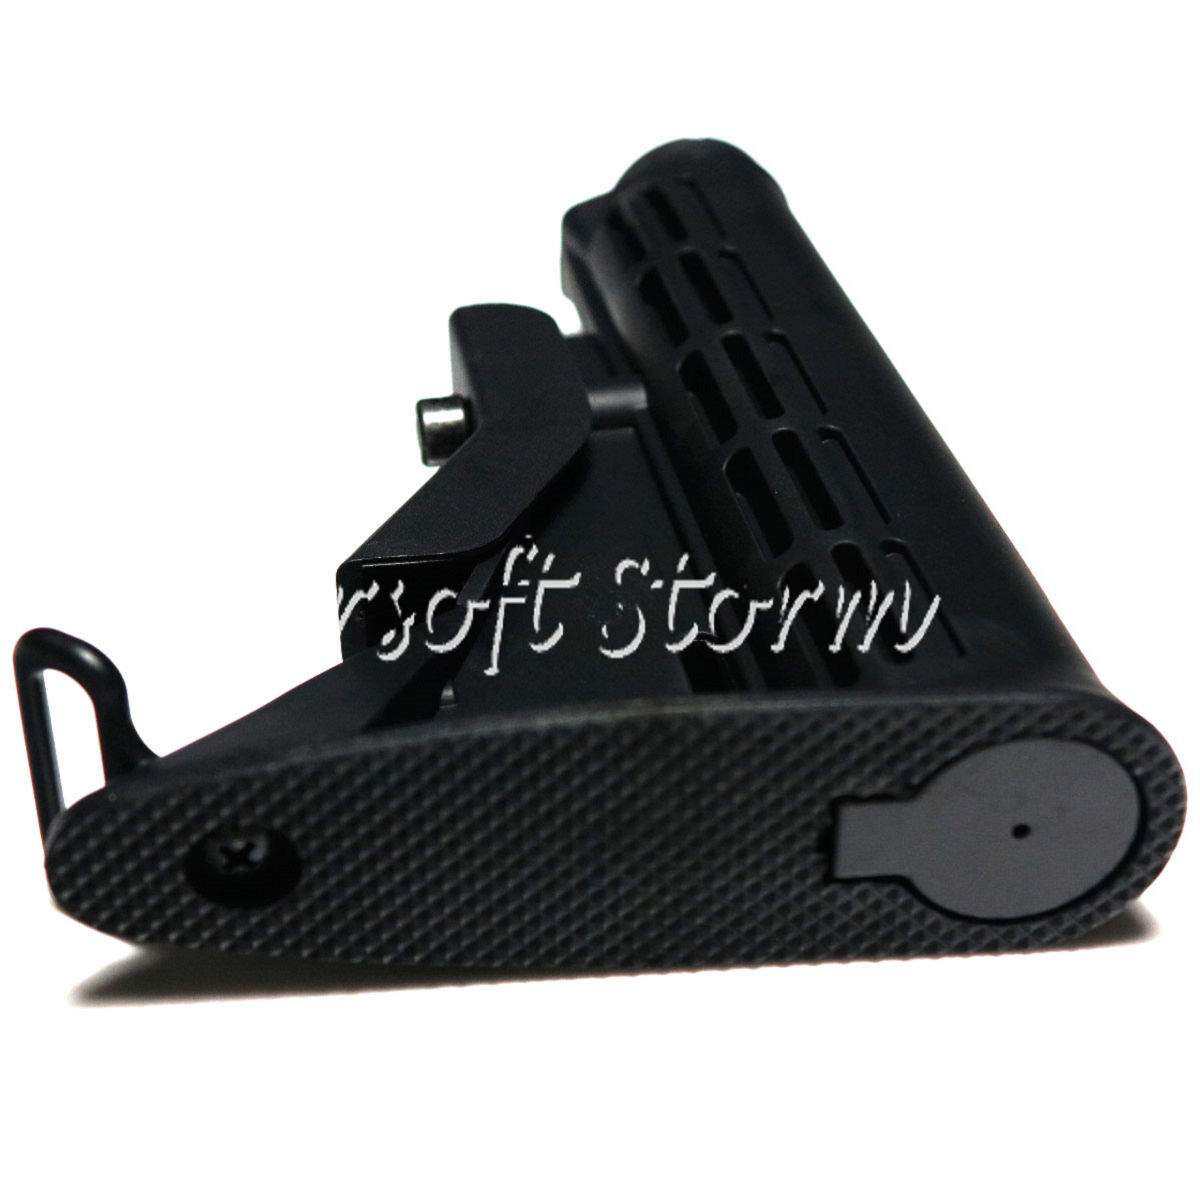 Airsoft Tactical Gear E&C 6 Position Sliding Stock with Pipe for HK416/M4/M16 AEG - Click Image to Close